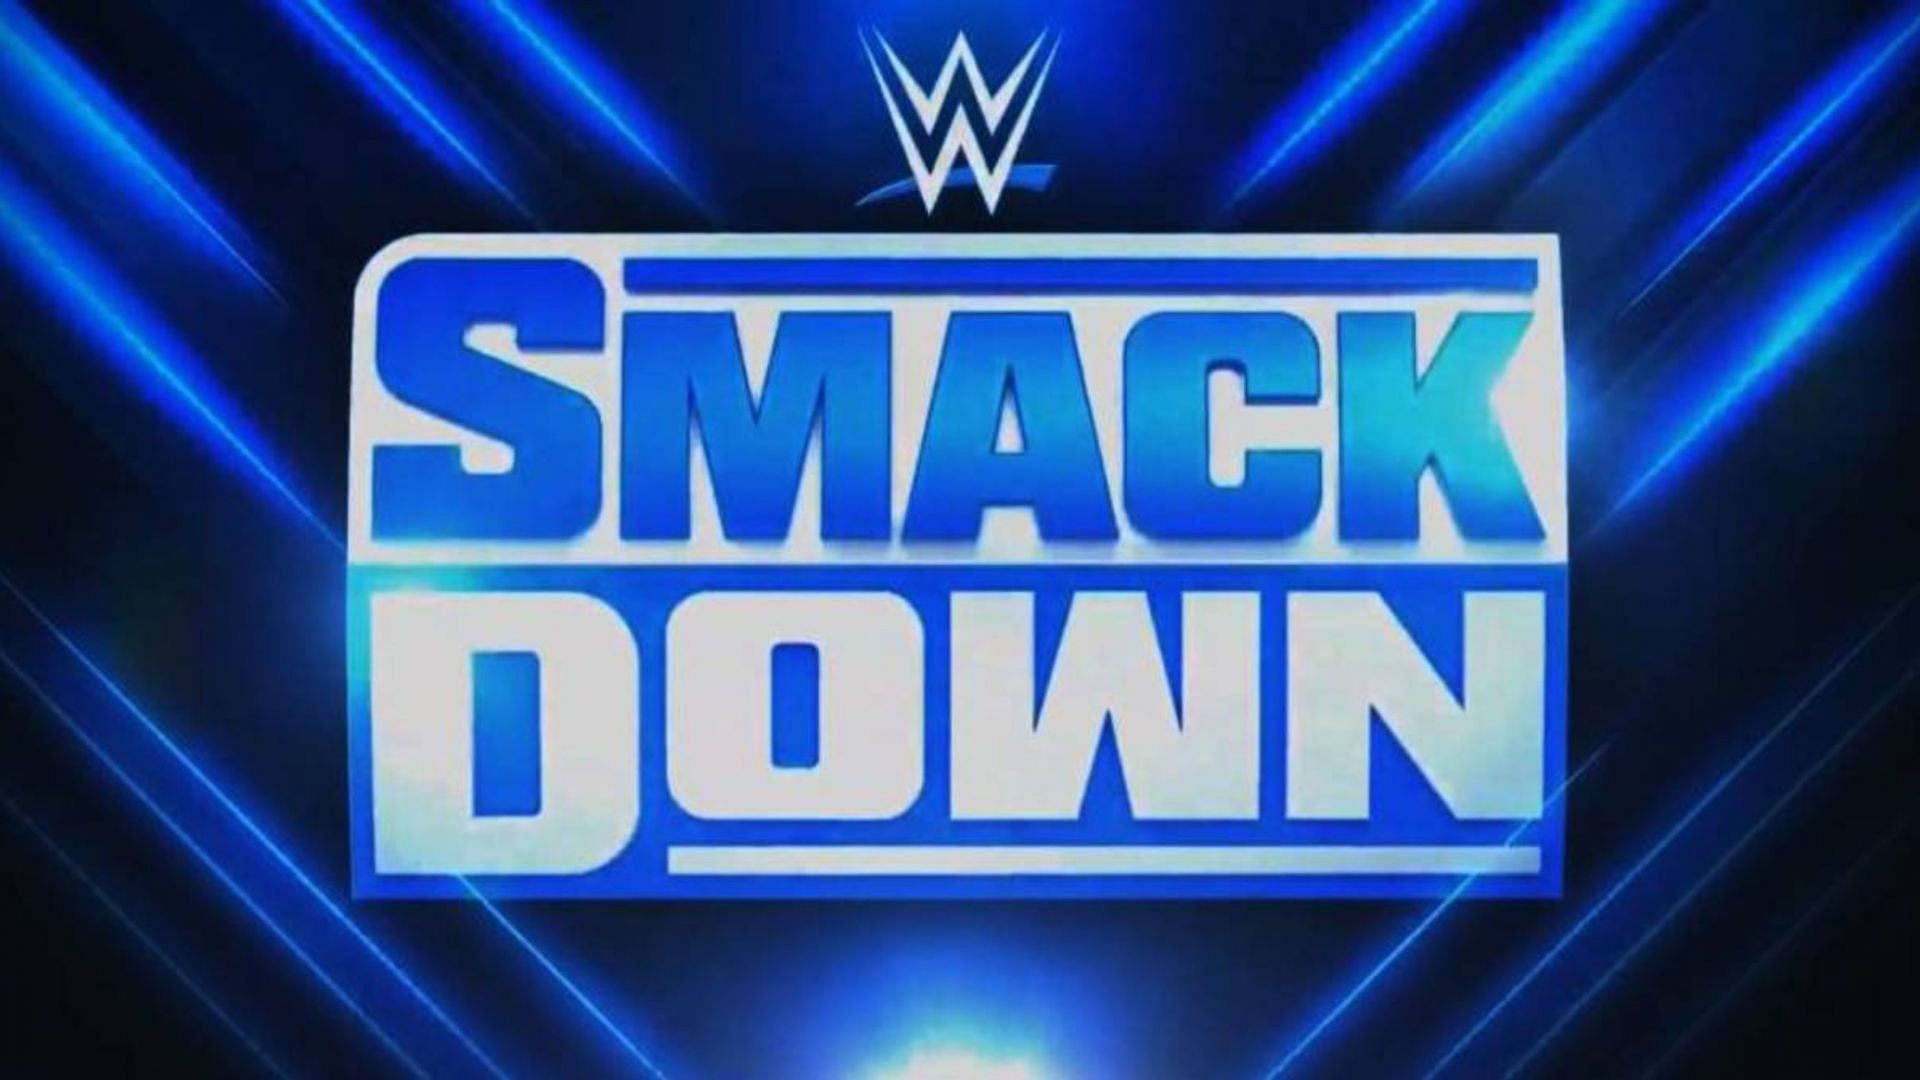 LA Knight is currently active on WWE SmackDown